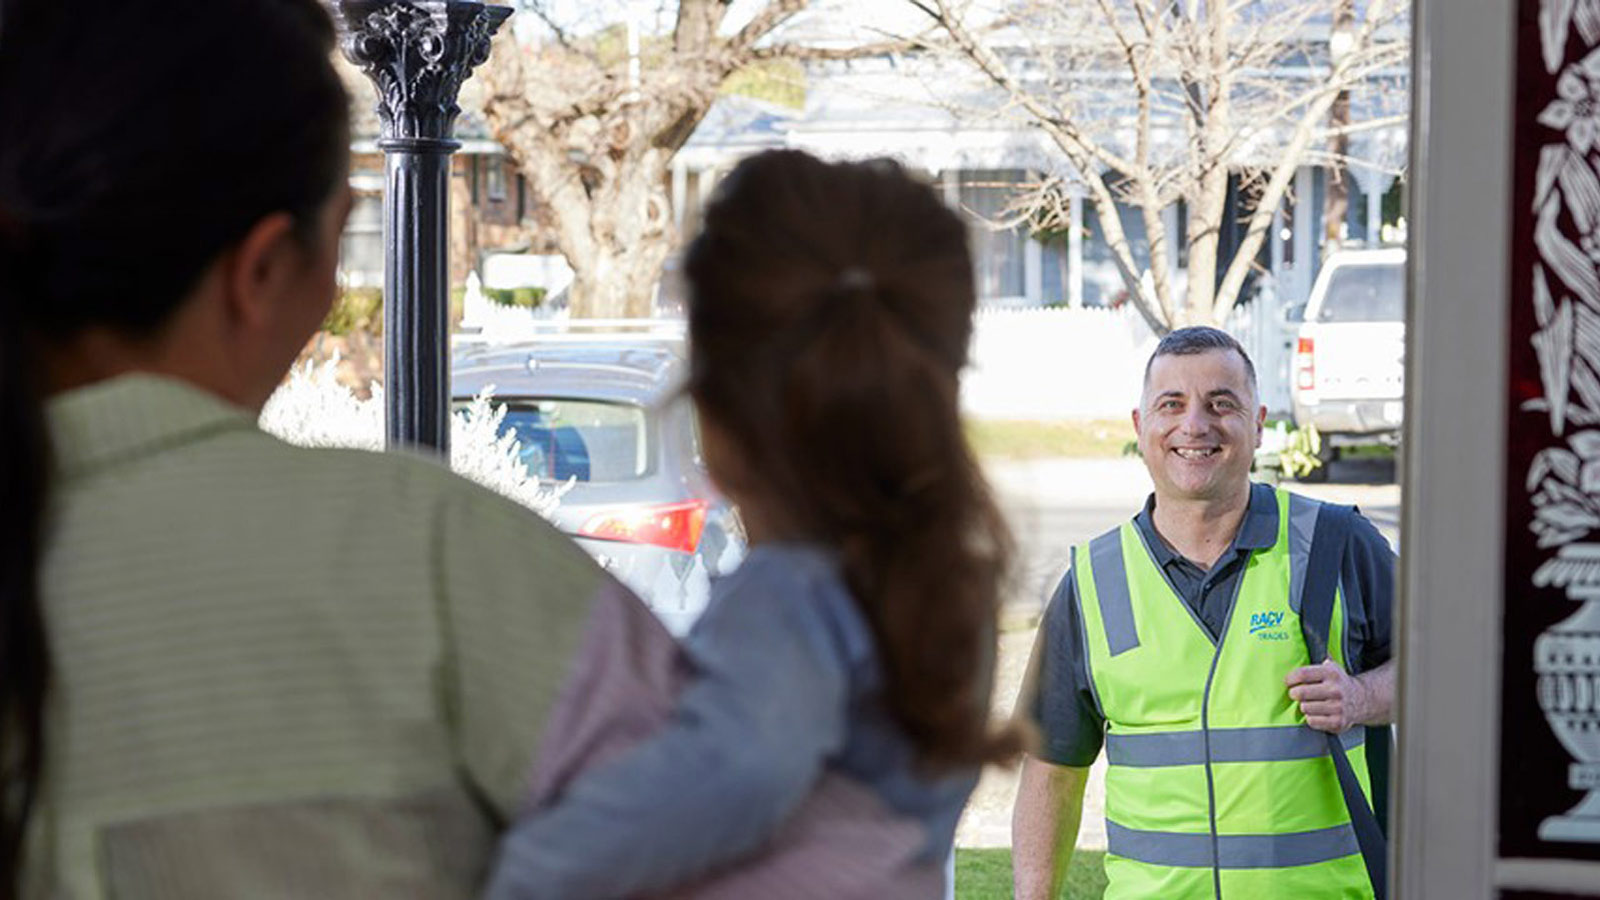 Woman holding a young child greets smiling tradesman at the front door.